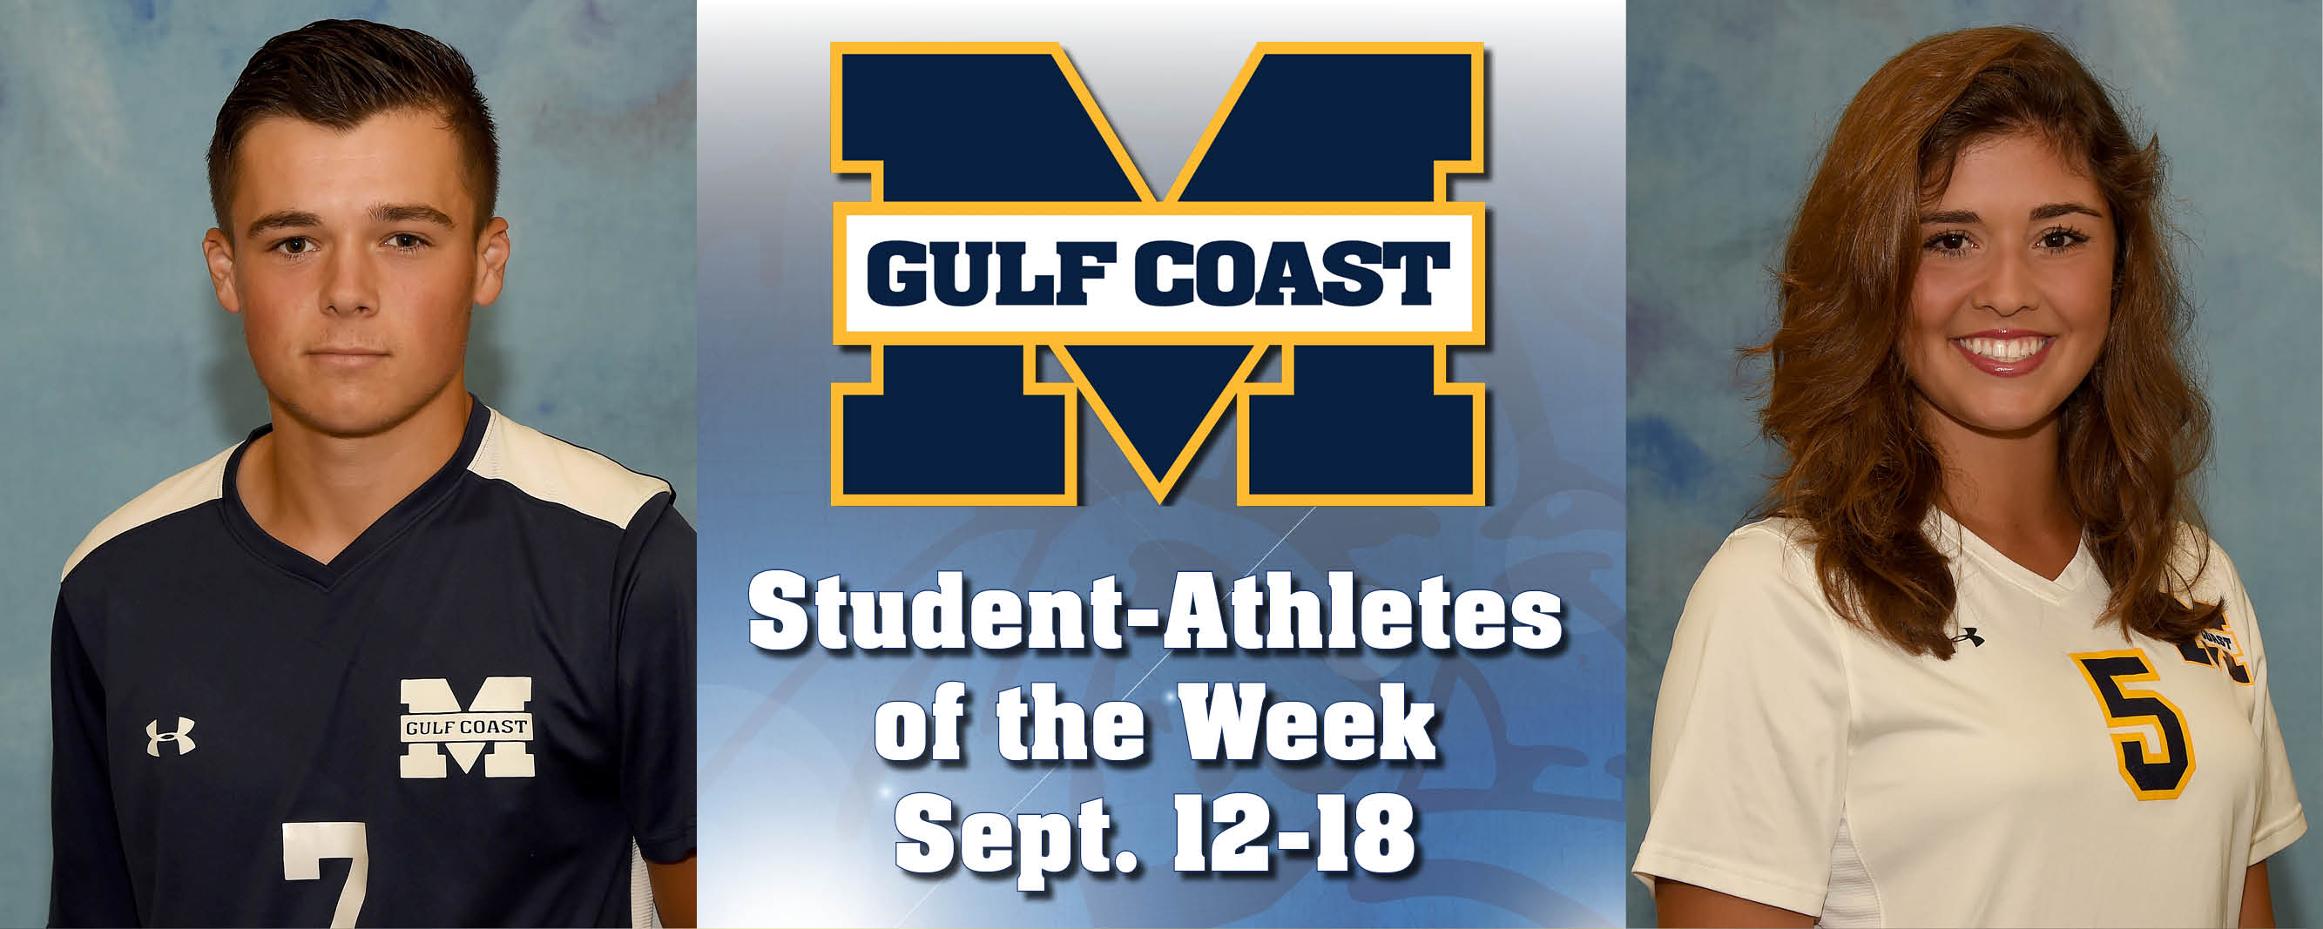 Hall, Massey named MGCCC Student-Athletes of the Week